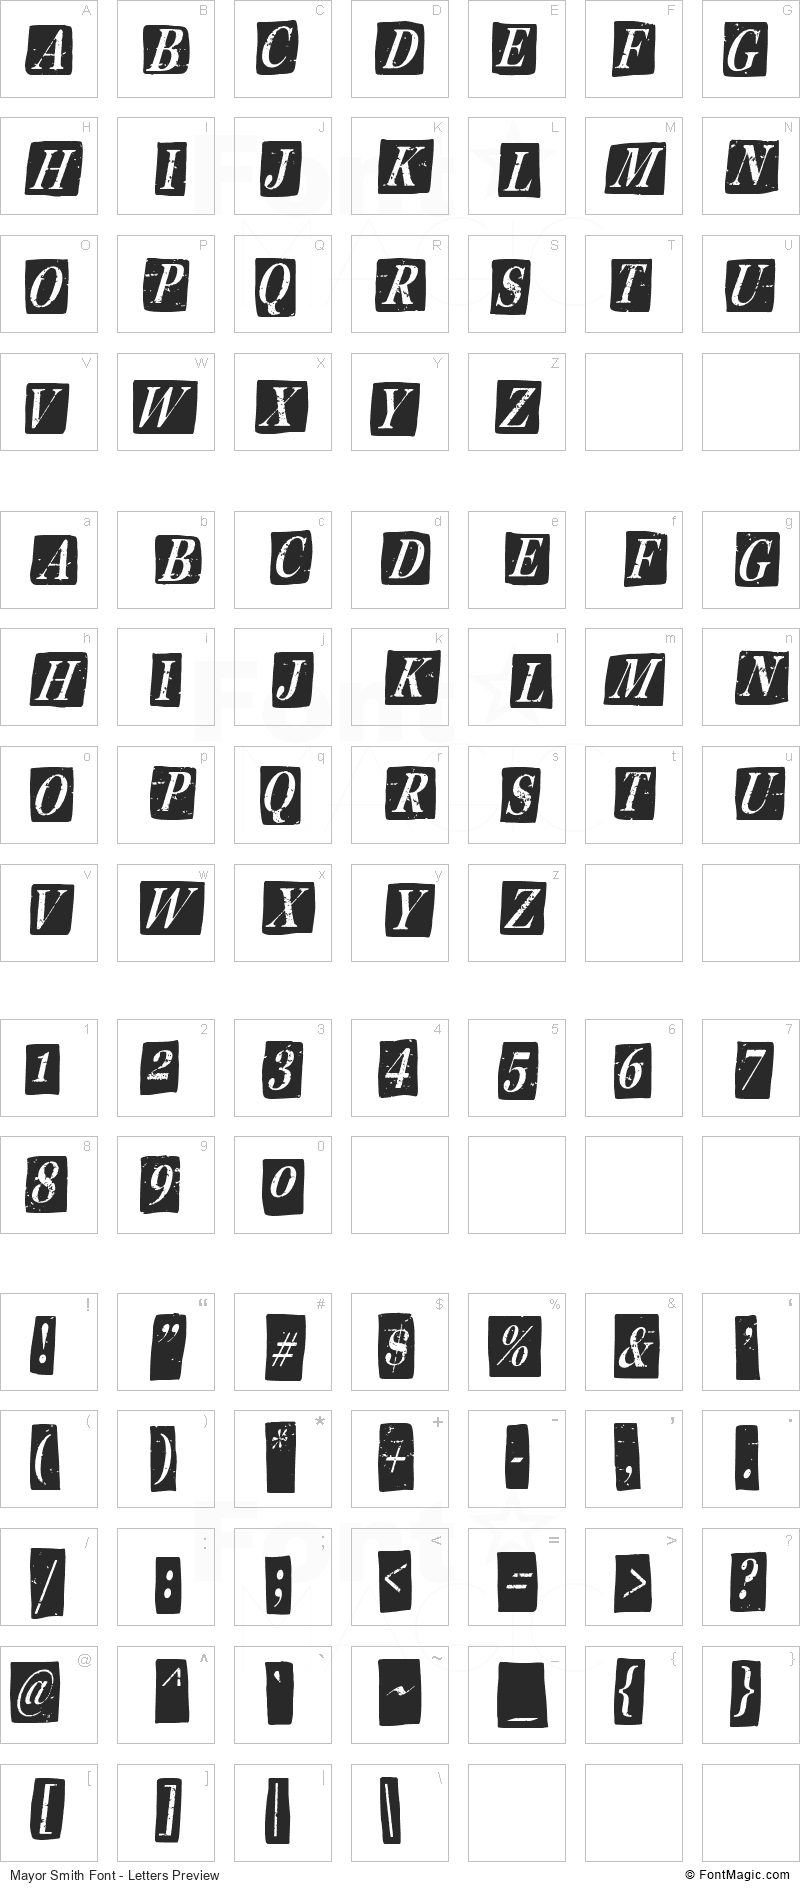 Mayor Smith Font - All Latters Preview Chart